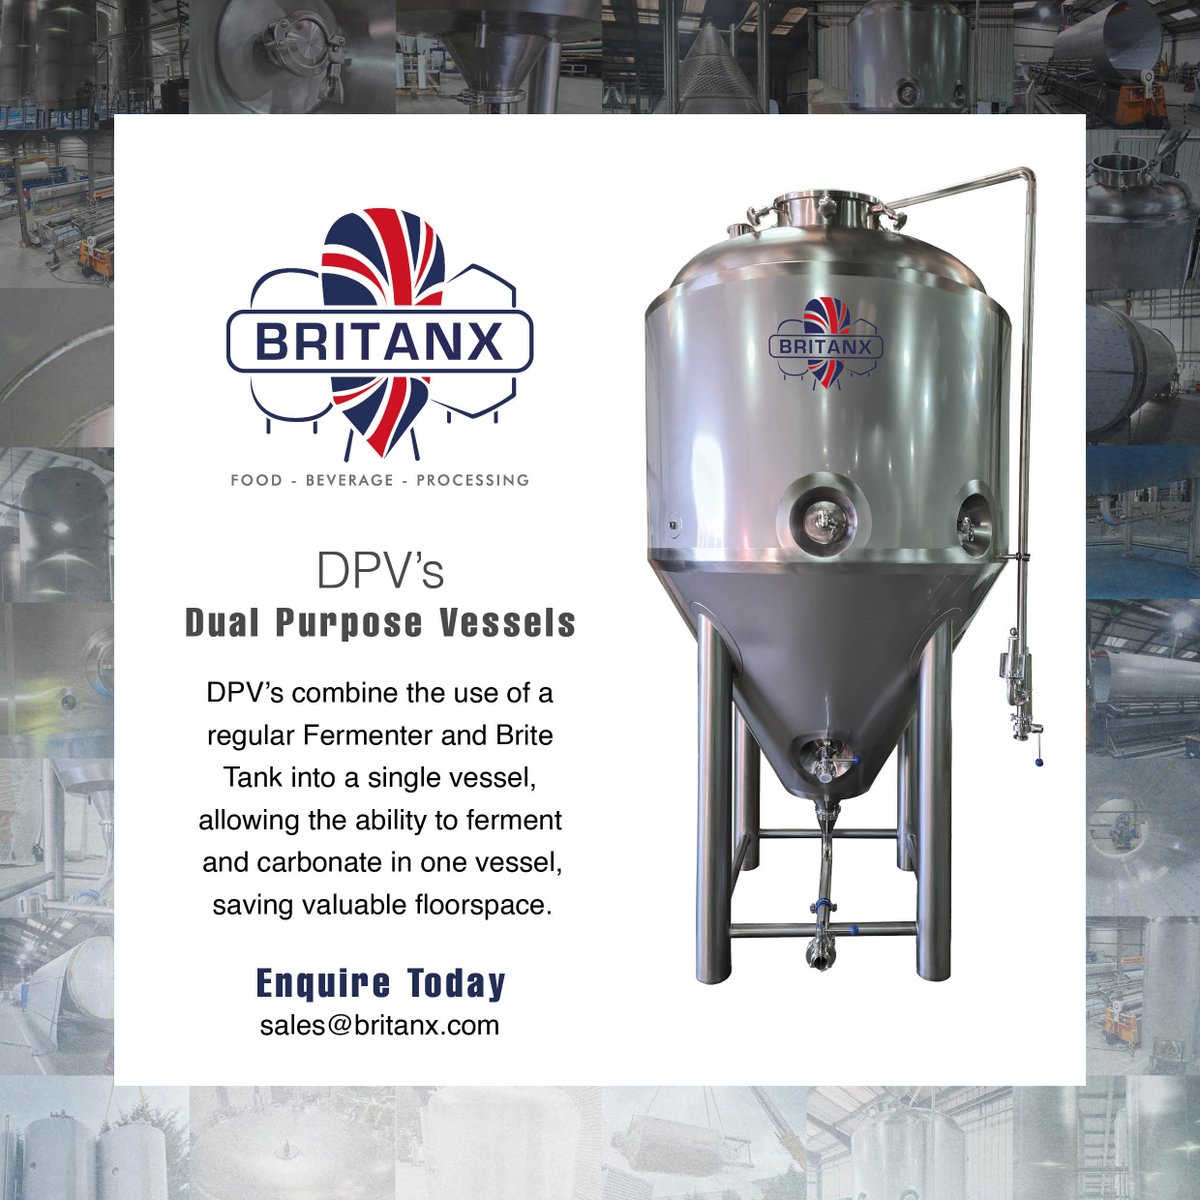 Make an inquiry today to get your next DPV project started!

Standard or bespoke vessels in a variety of sizes are available for discussion.

For further information, please contact sales@britanx.com.

#DPV #unitank #fermentation #FV #conicalfermenter #brewery #ukmfg #britanx